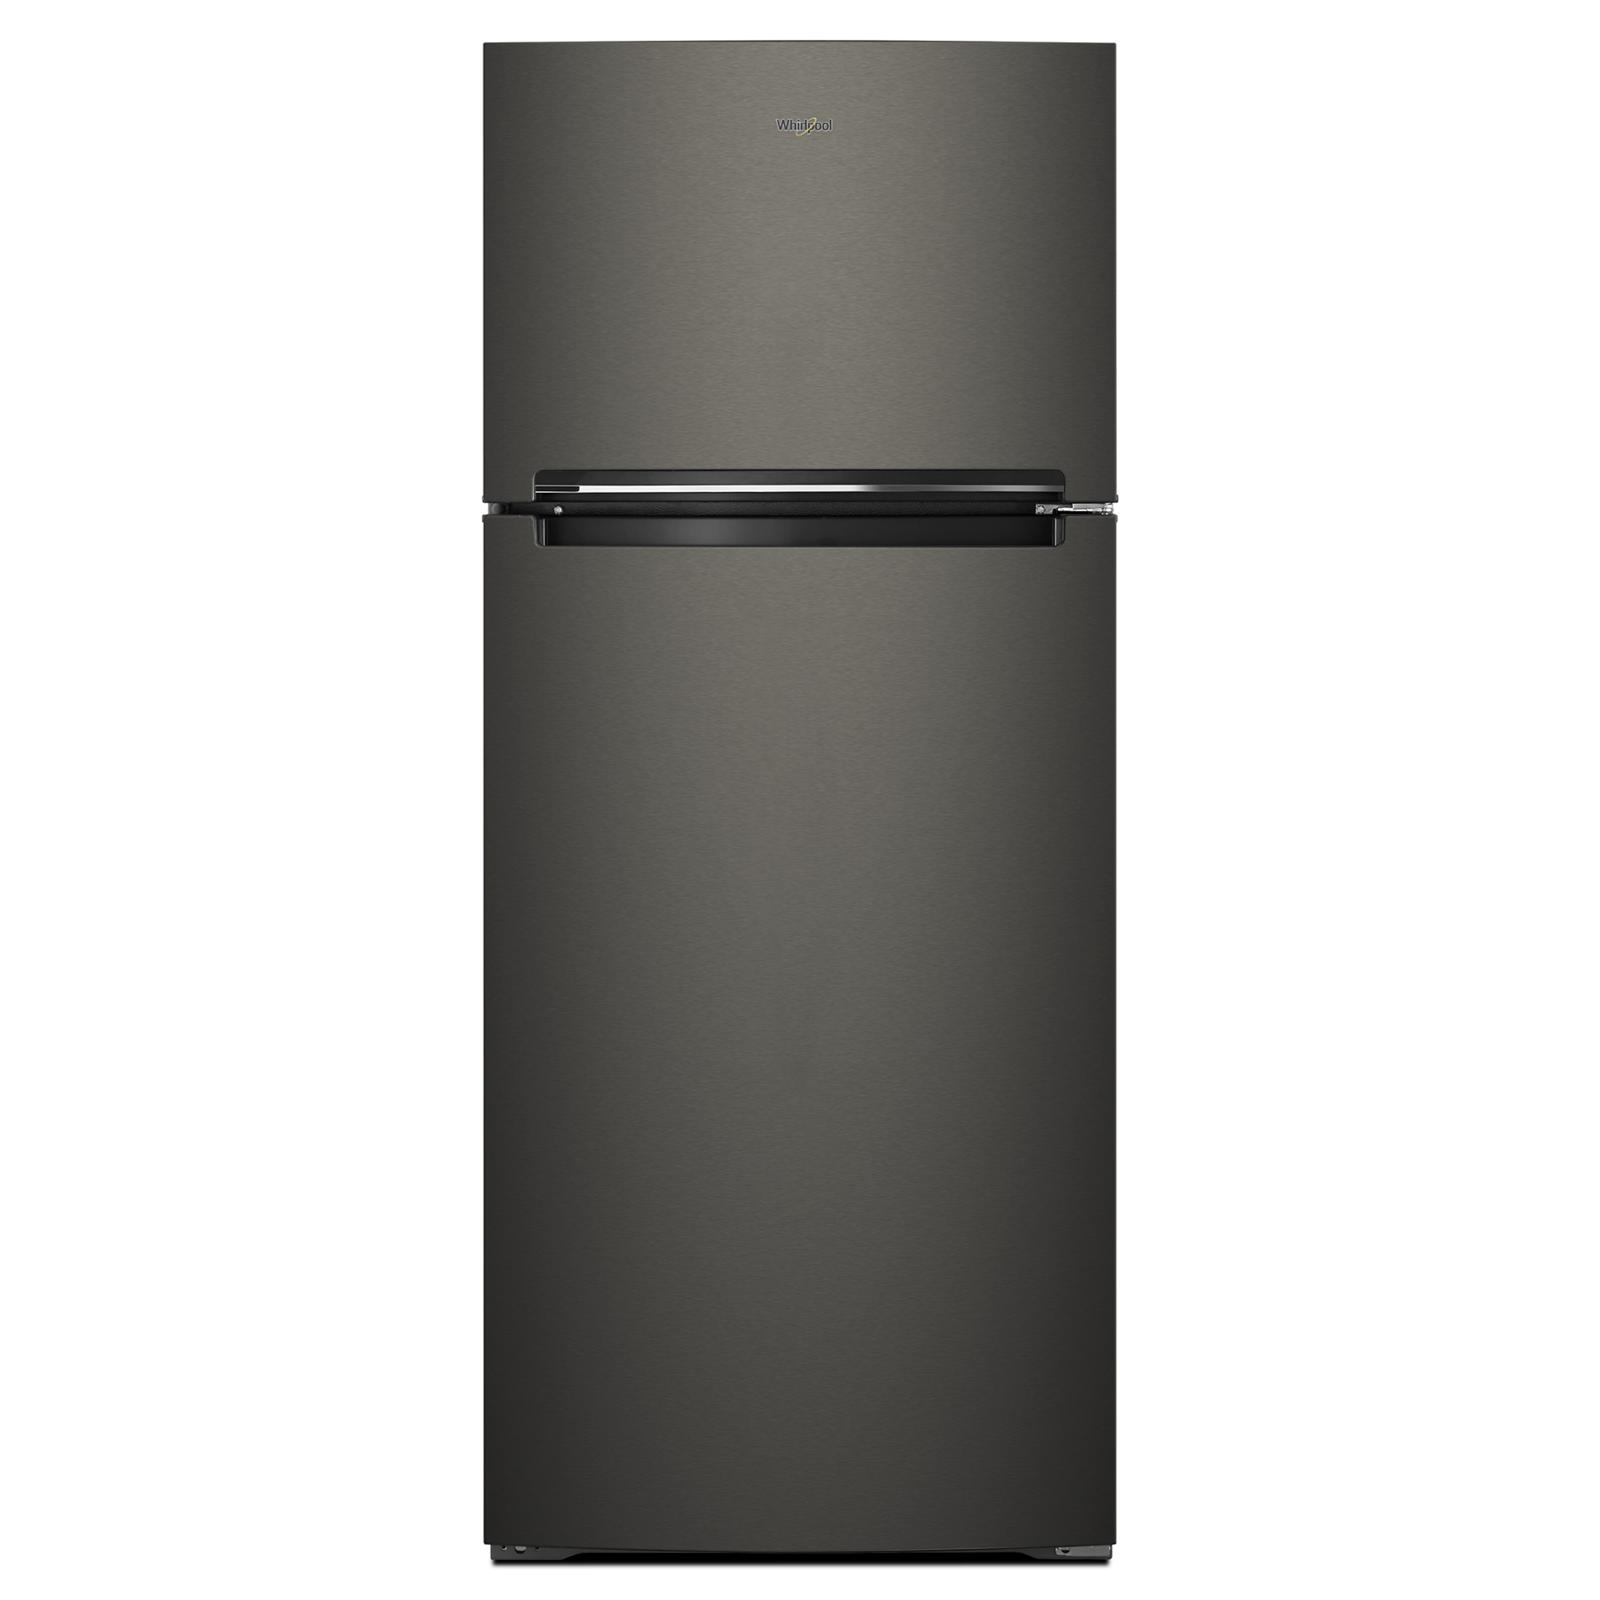 Whirlpool - 28 Inch 17.61 cu. ft Top Mount Refrigerator in Black Stainless - WRT518SZKV